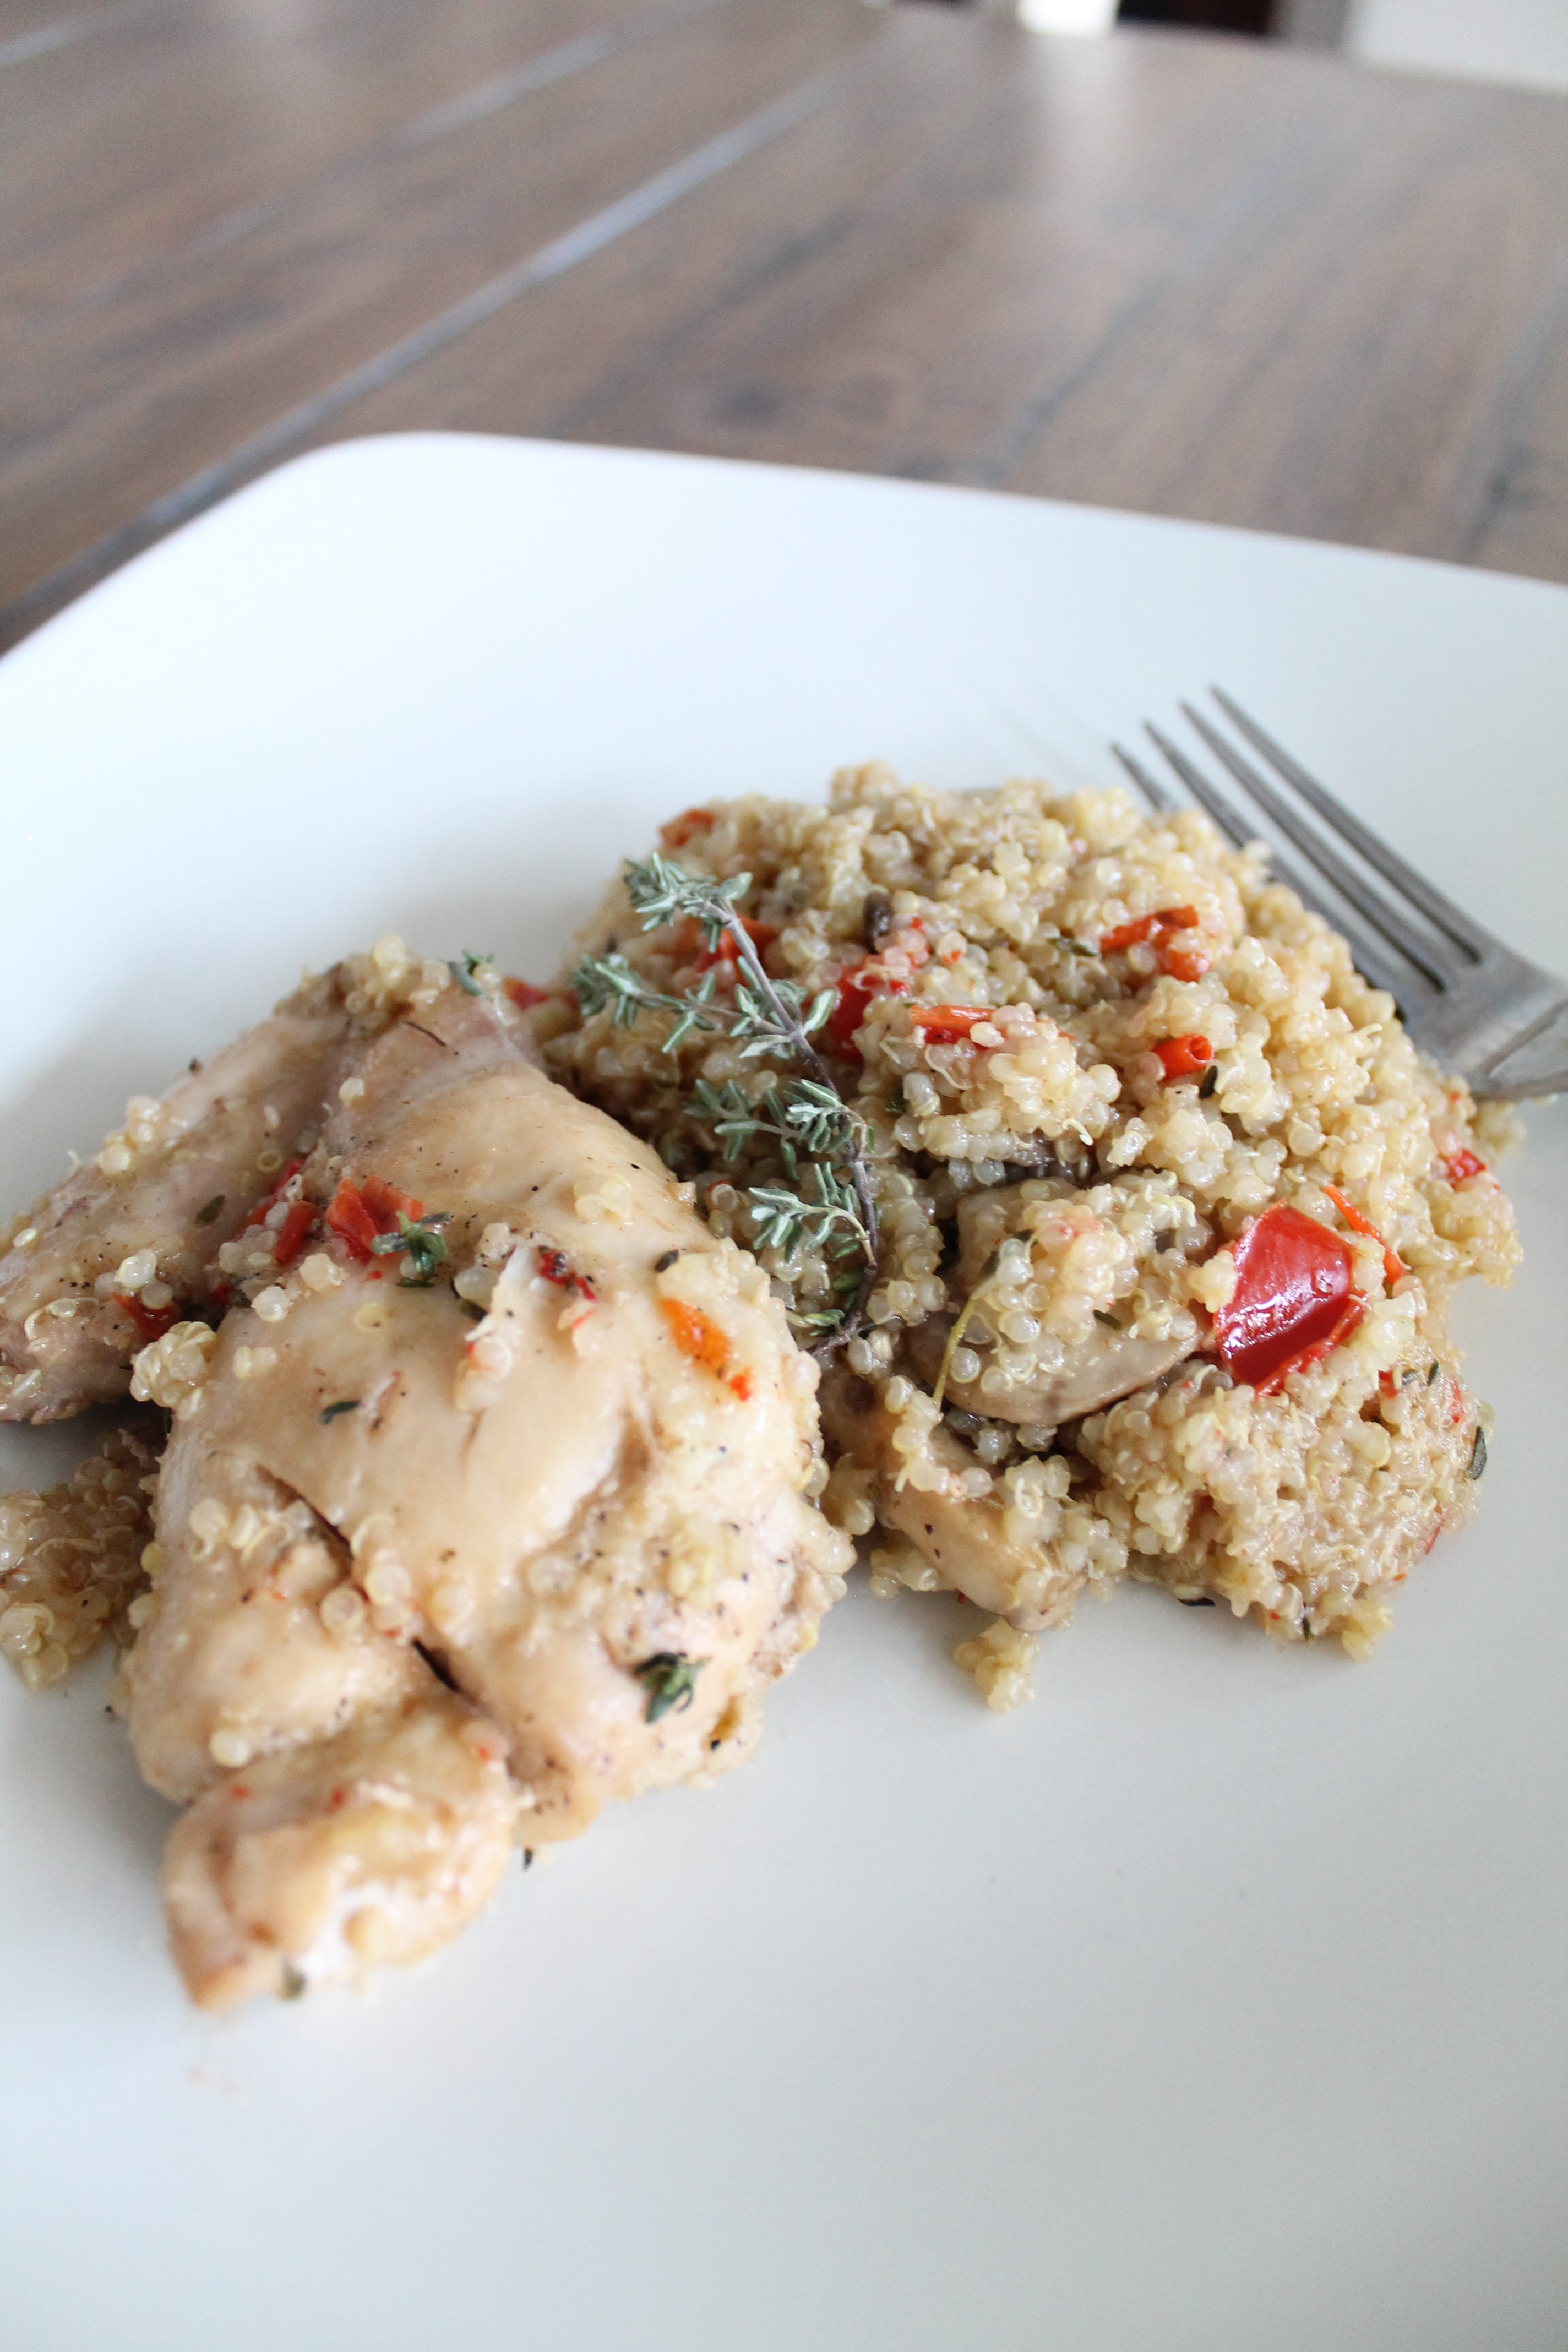 Garlic & Chicken Mushroom Quinoa. Easy 30 minute meal for dinner time featuring truRoots Quinoa. So easy and delicious! Your whole family will love it! #ad #truRoots